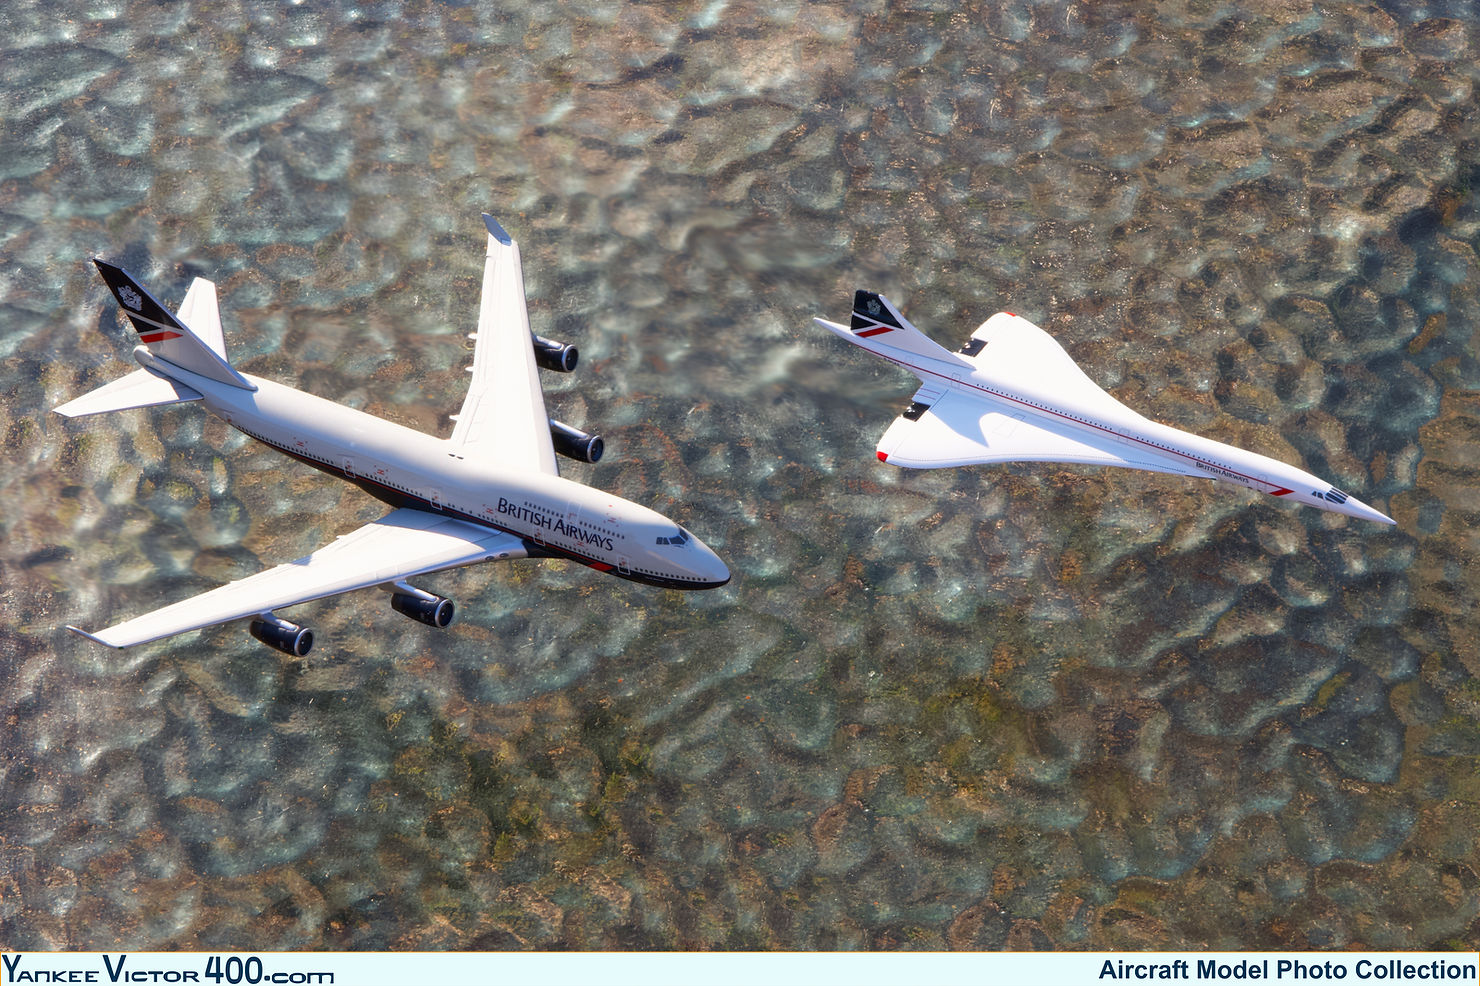 A photo portraying two 1:400 scale models of British Airways aircraft, a 747 and a Concorde. The aircraft appear to be in flight. 